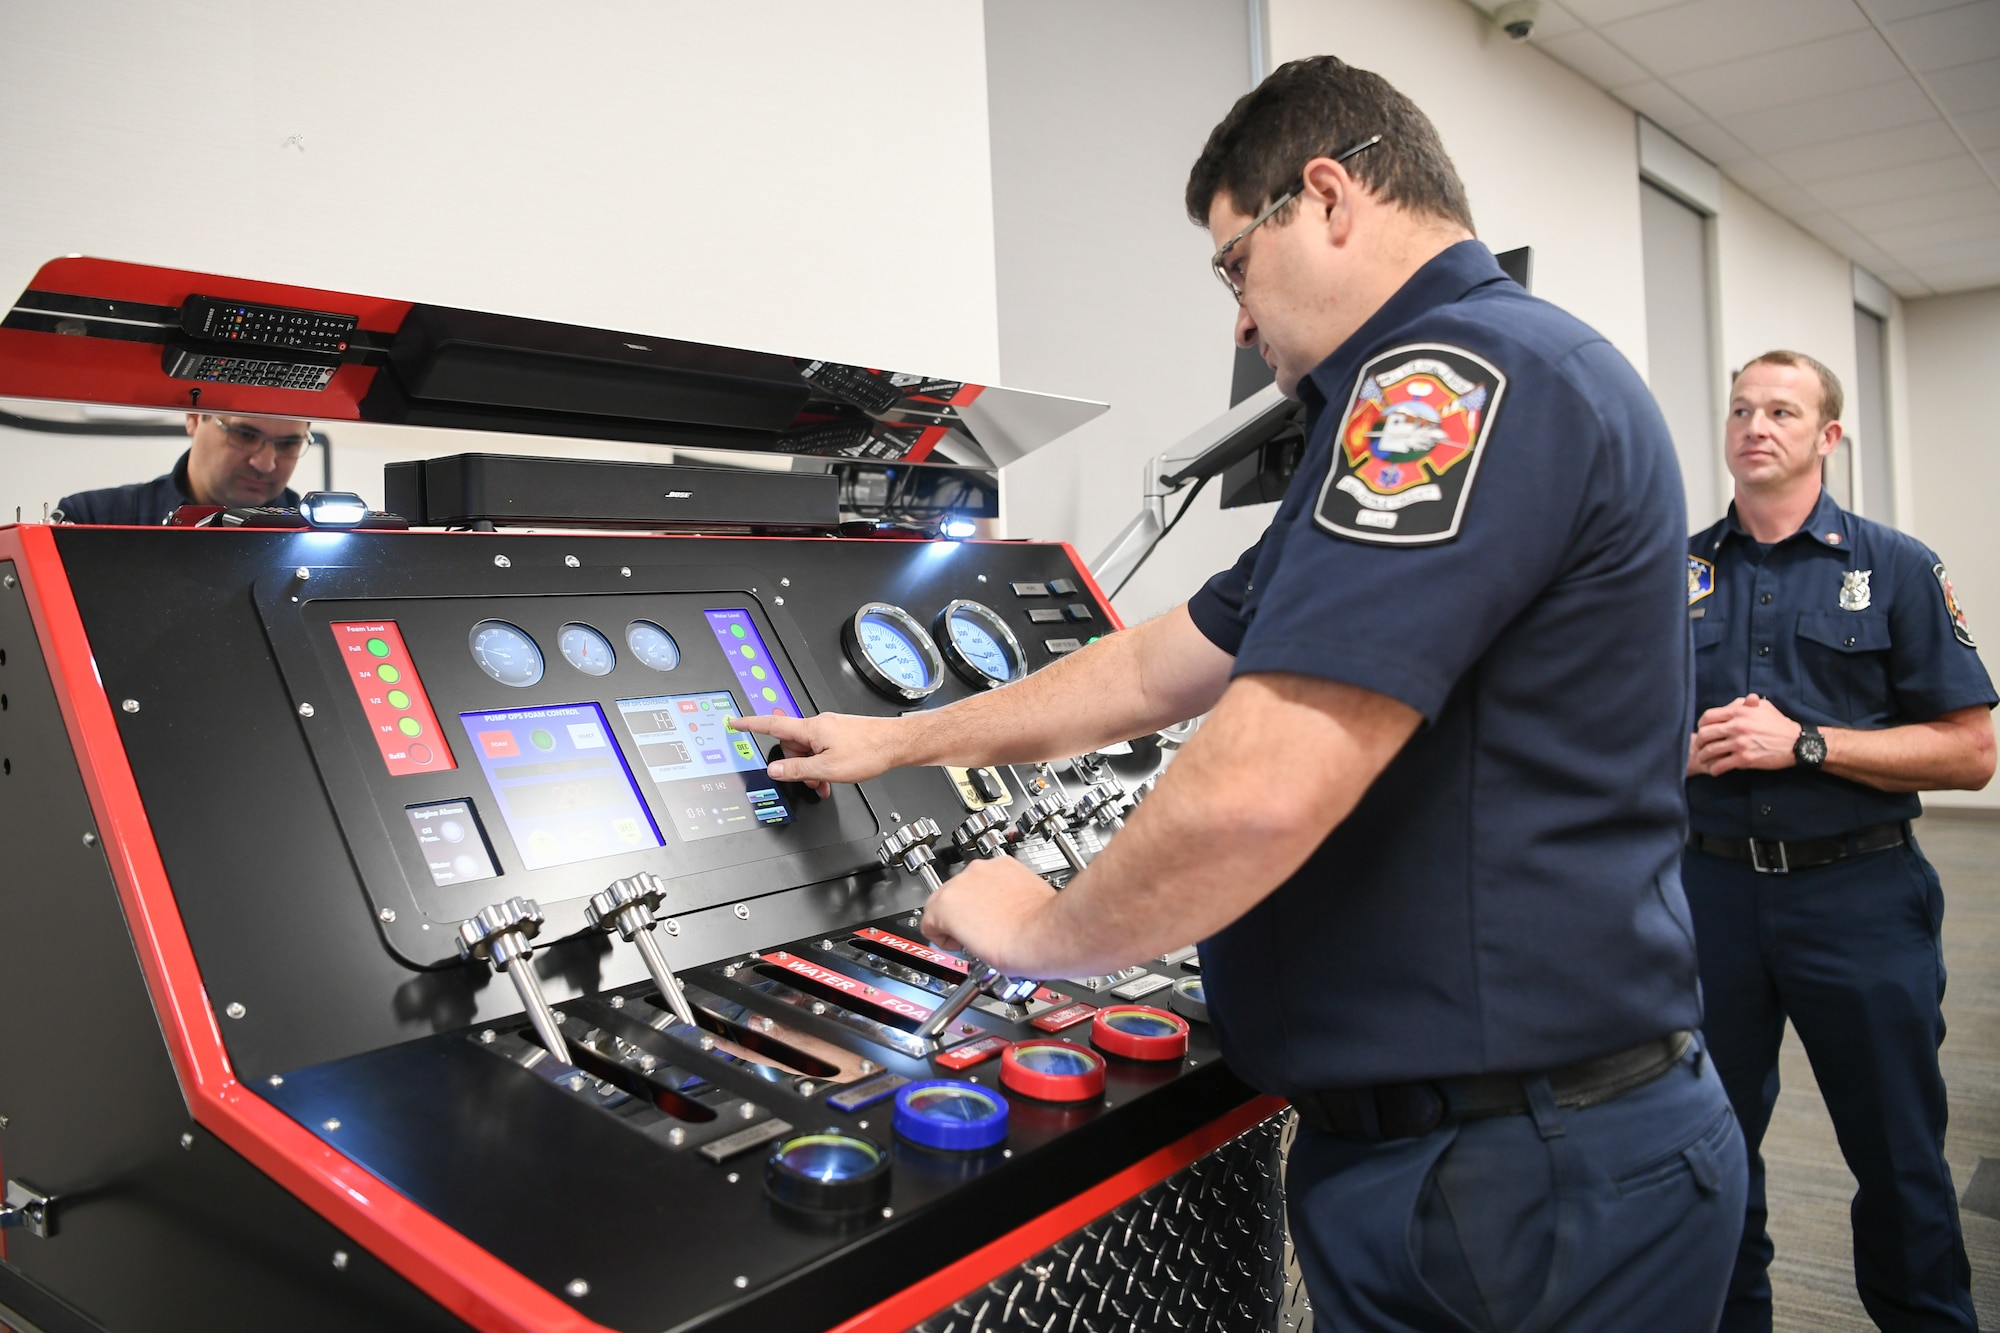 Jason Medina, Fire and Emergency Services (F&ES) driver operator, touches a digital screen on a pump simulator panel that is adorned with handles,dials and gauges, while Daniel Payne, F&ES instructor, observes in the background.